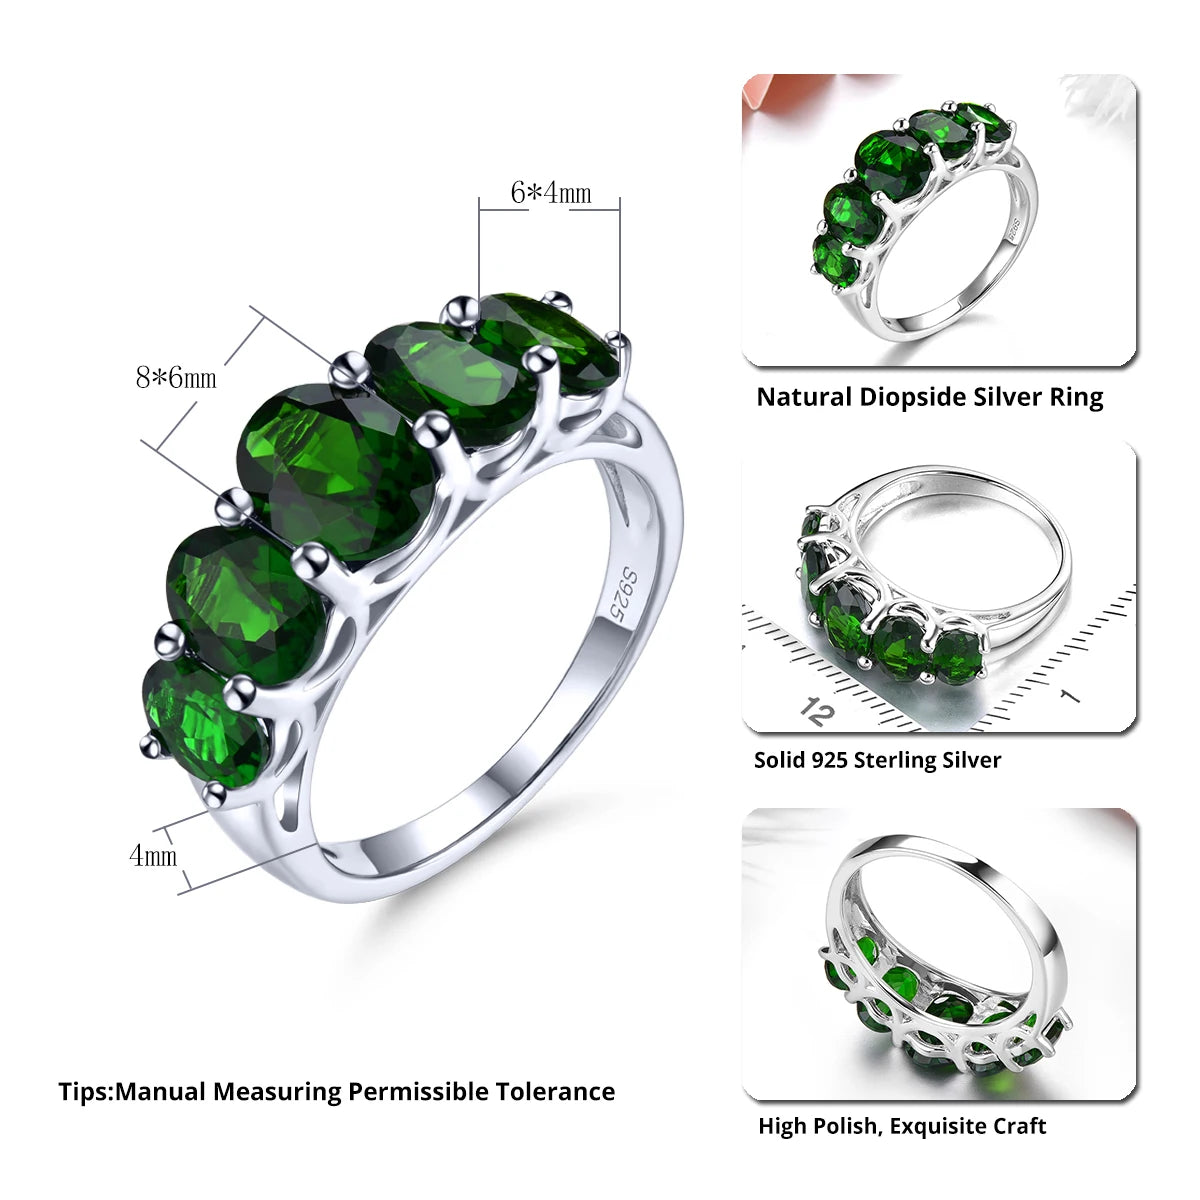 Natural Chrome Diopside Solid Silver Rings 3.8 Carats Oval Faced Cut Classic Luxury Style Gifts for Mother Family Members